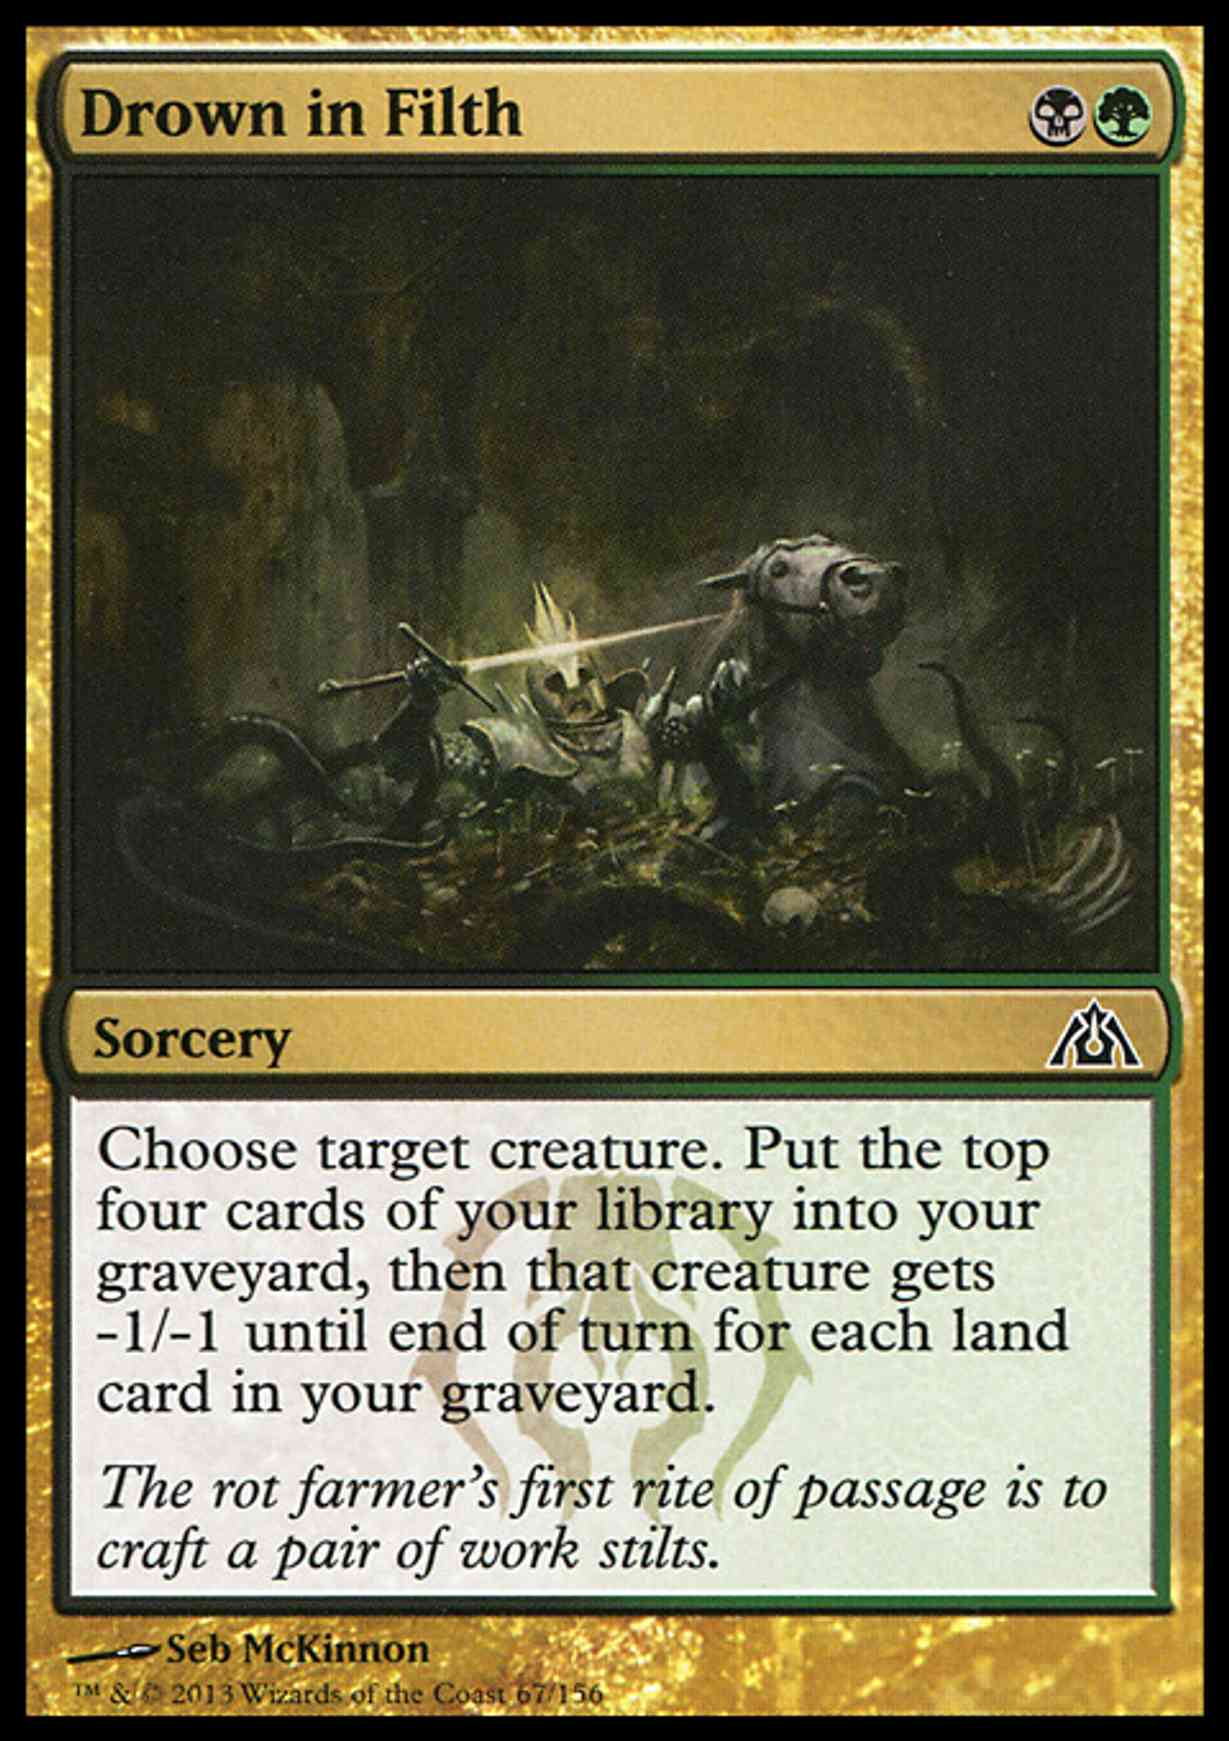 Drown in Filth magic card front